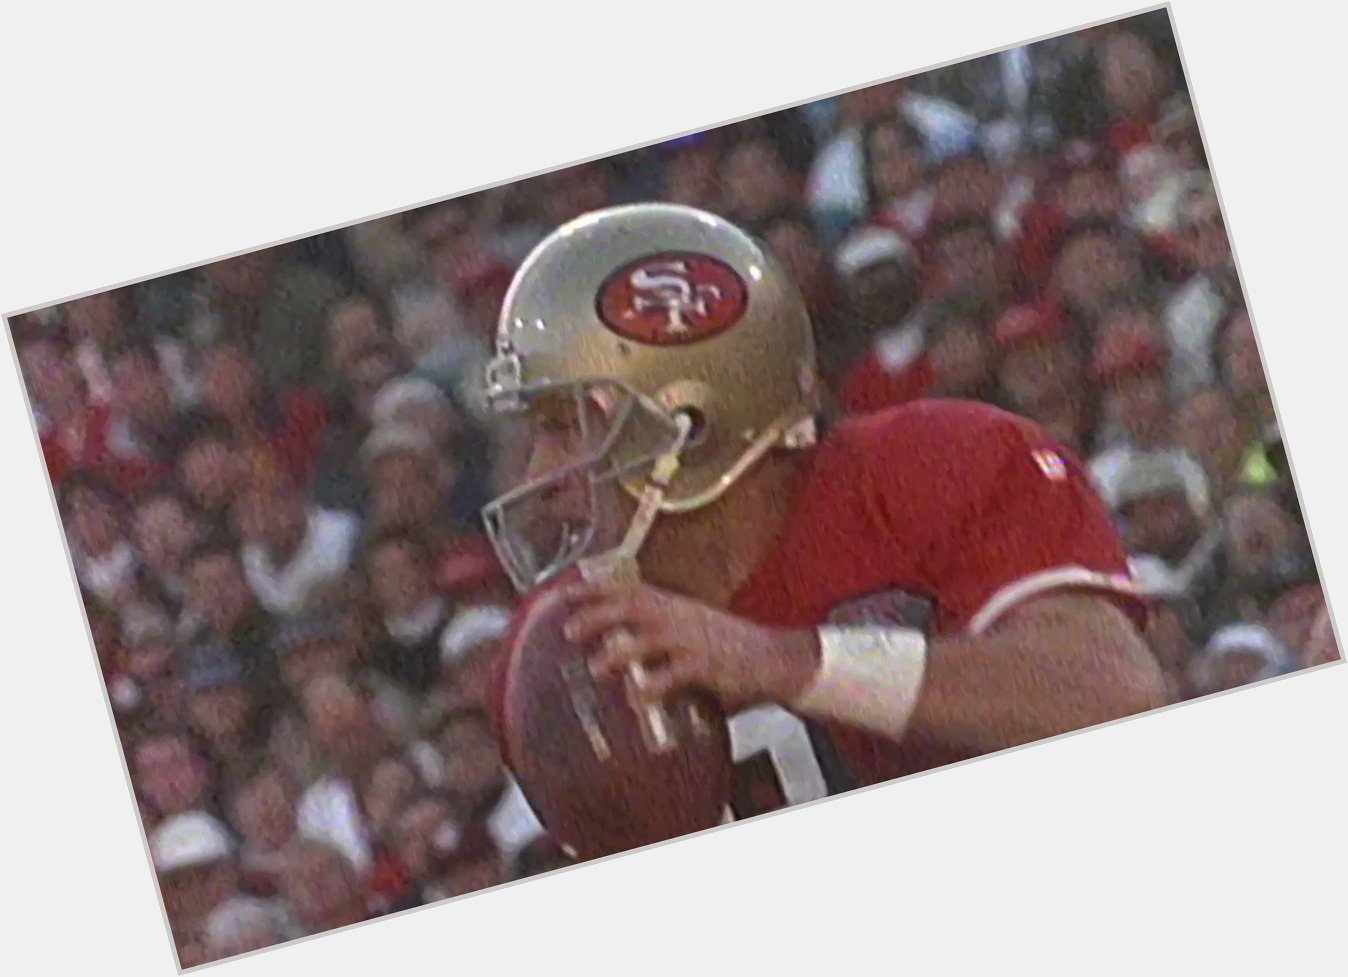 The only man to wear in the red and gold. Happy birthday Steve Young! 